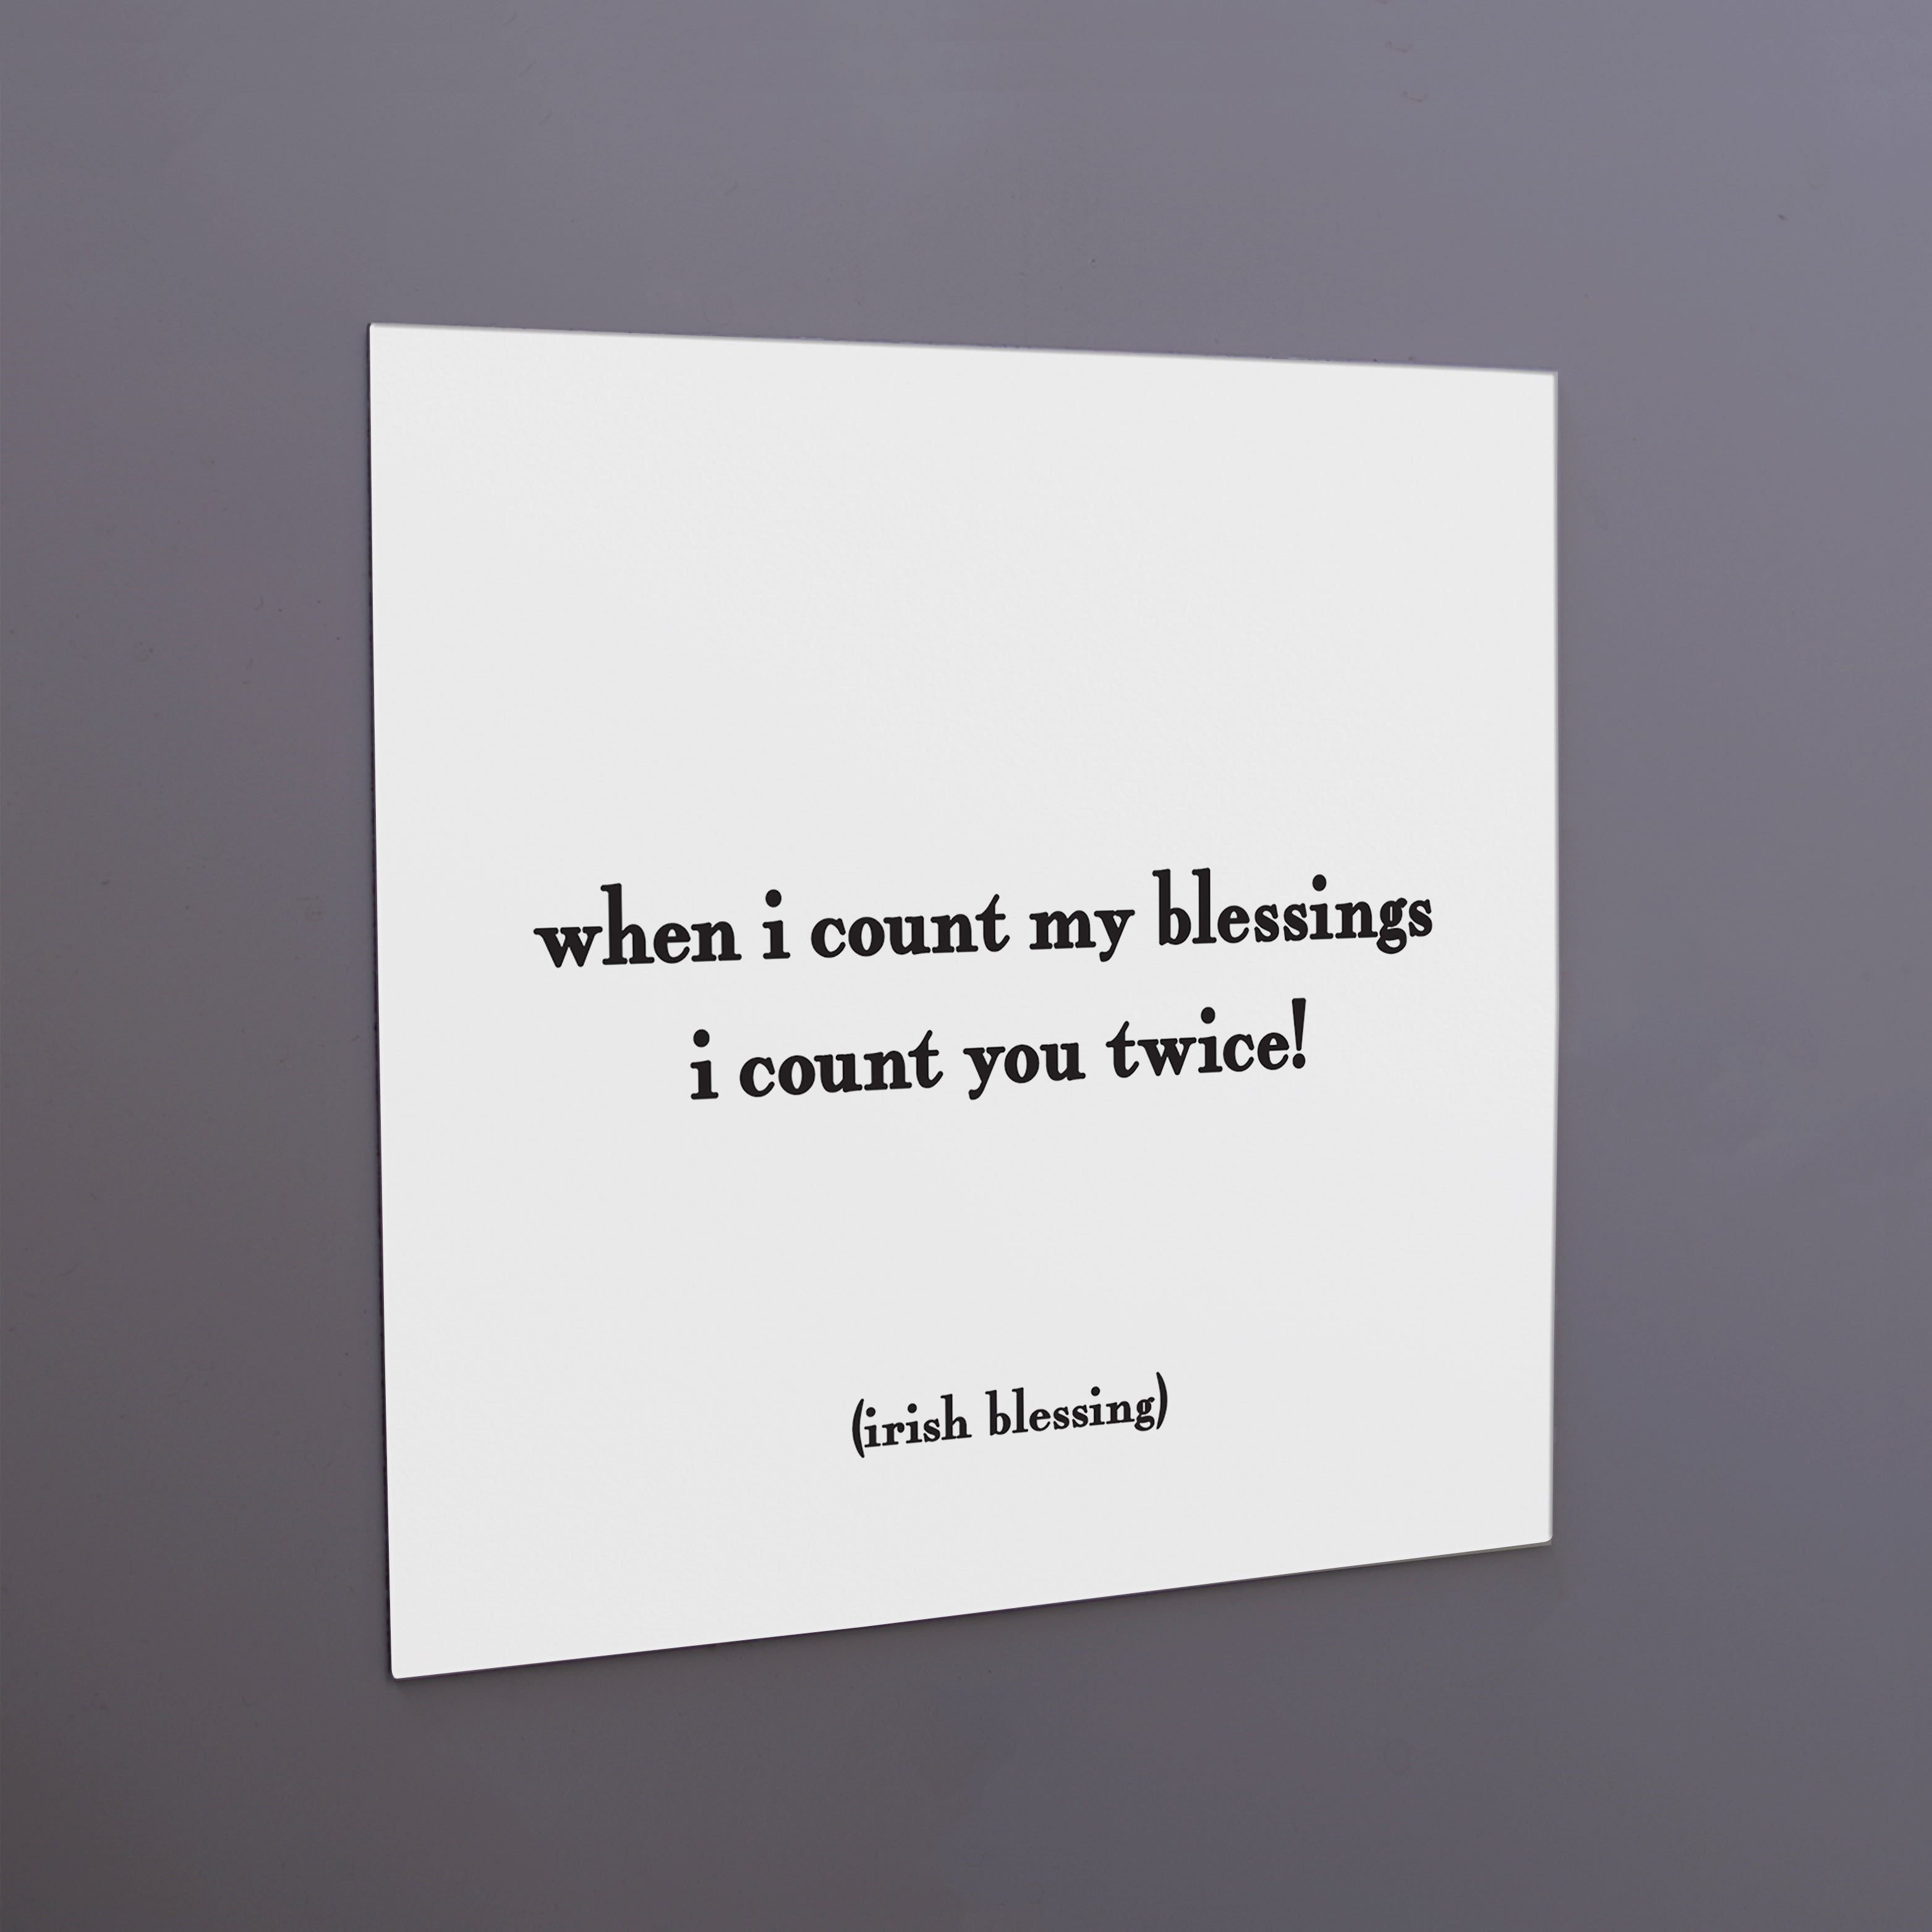 "when i count my blessings" magnet